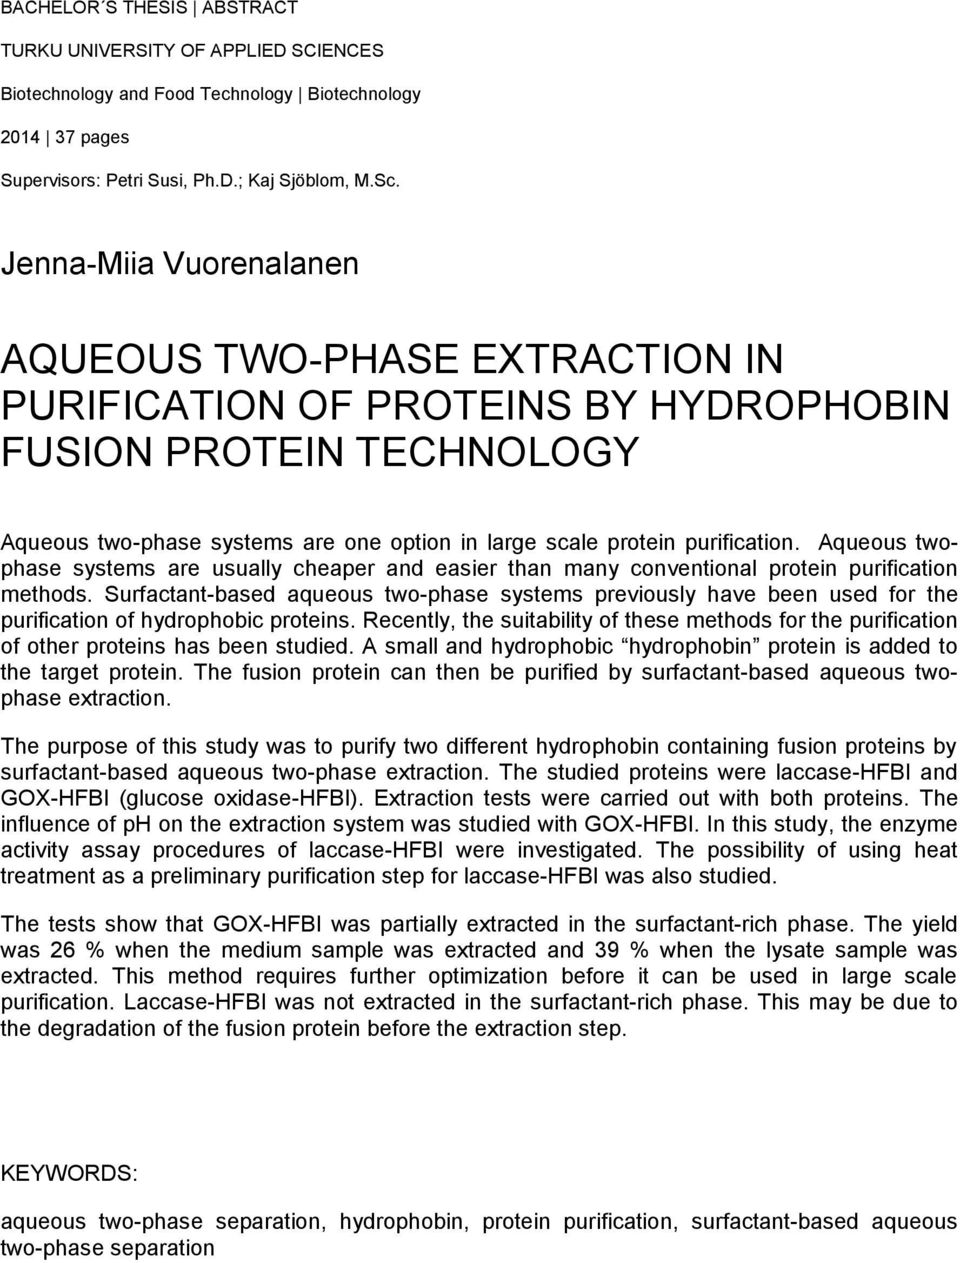 Aqueous twophase systems are usually cheaper and easier than many conventional protein purification methods.